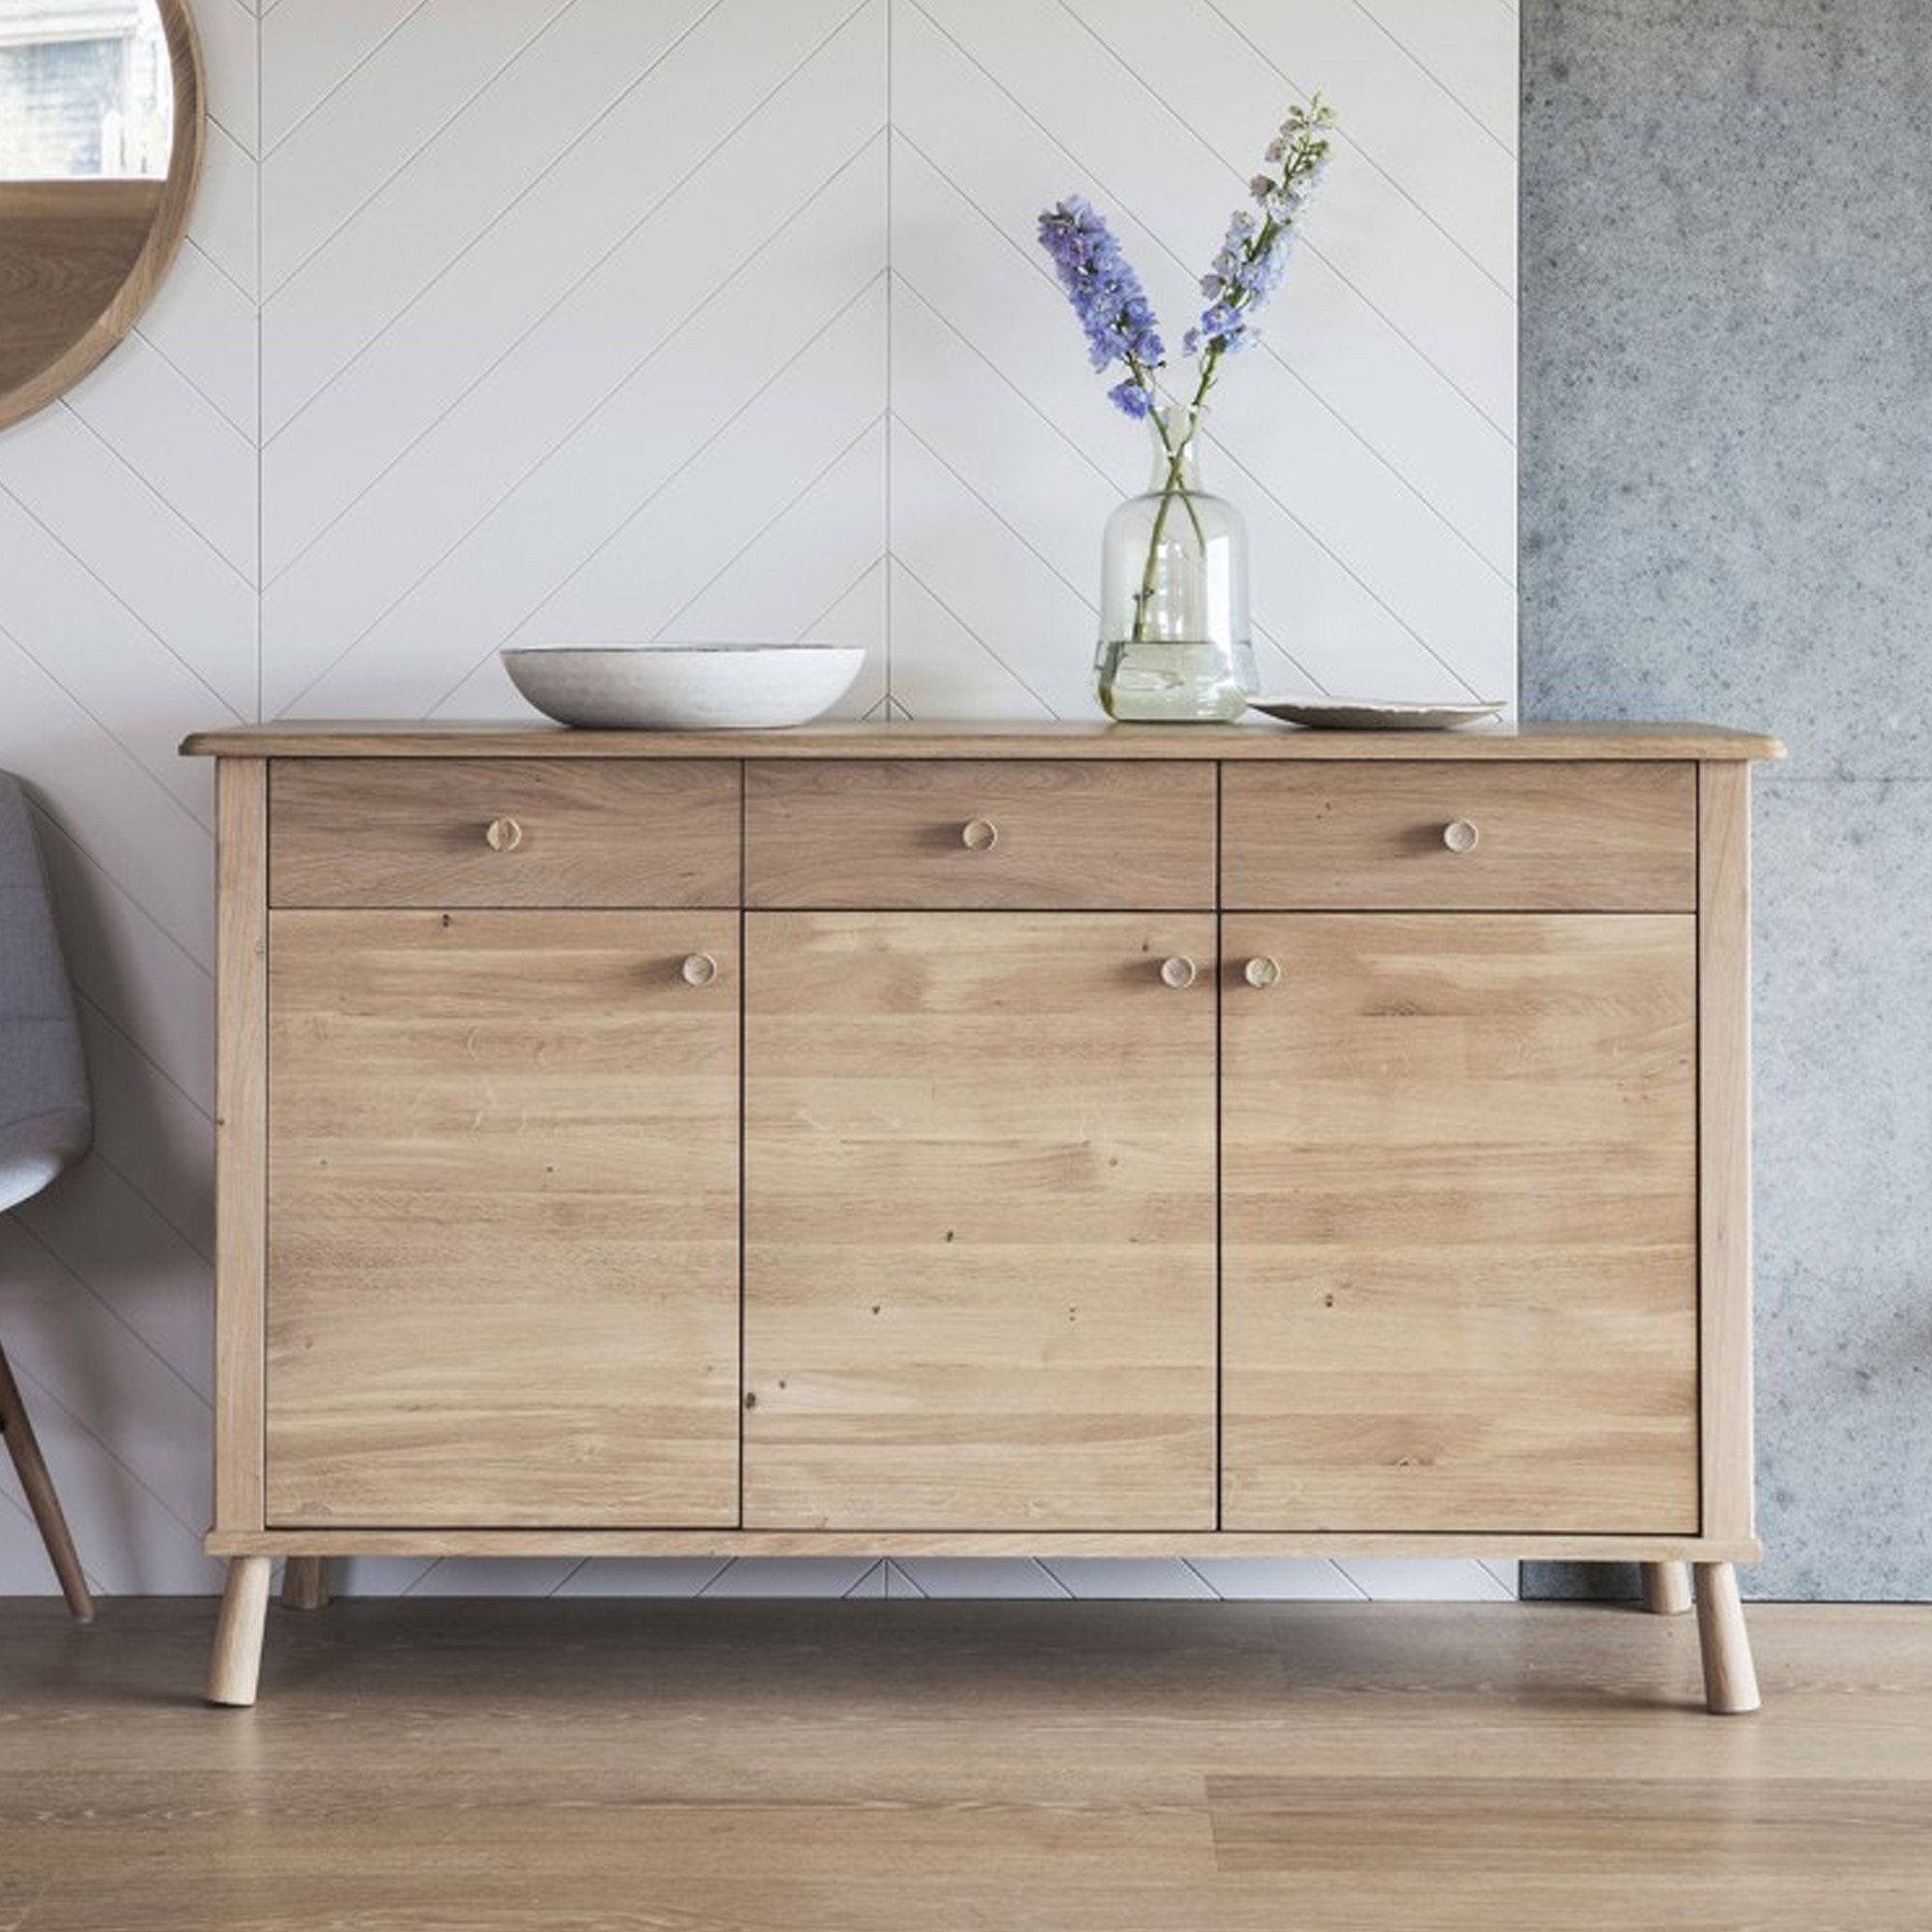 Wycombe 3 Door 3 Drawer Sideboard | Wooden Sideboards With Storage Throughout 3 Drawer Sideboards (View 6 of 20)